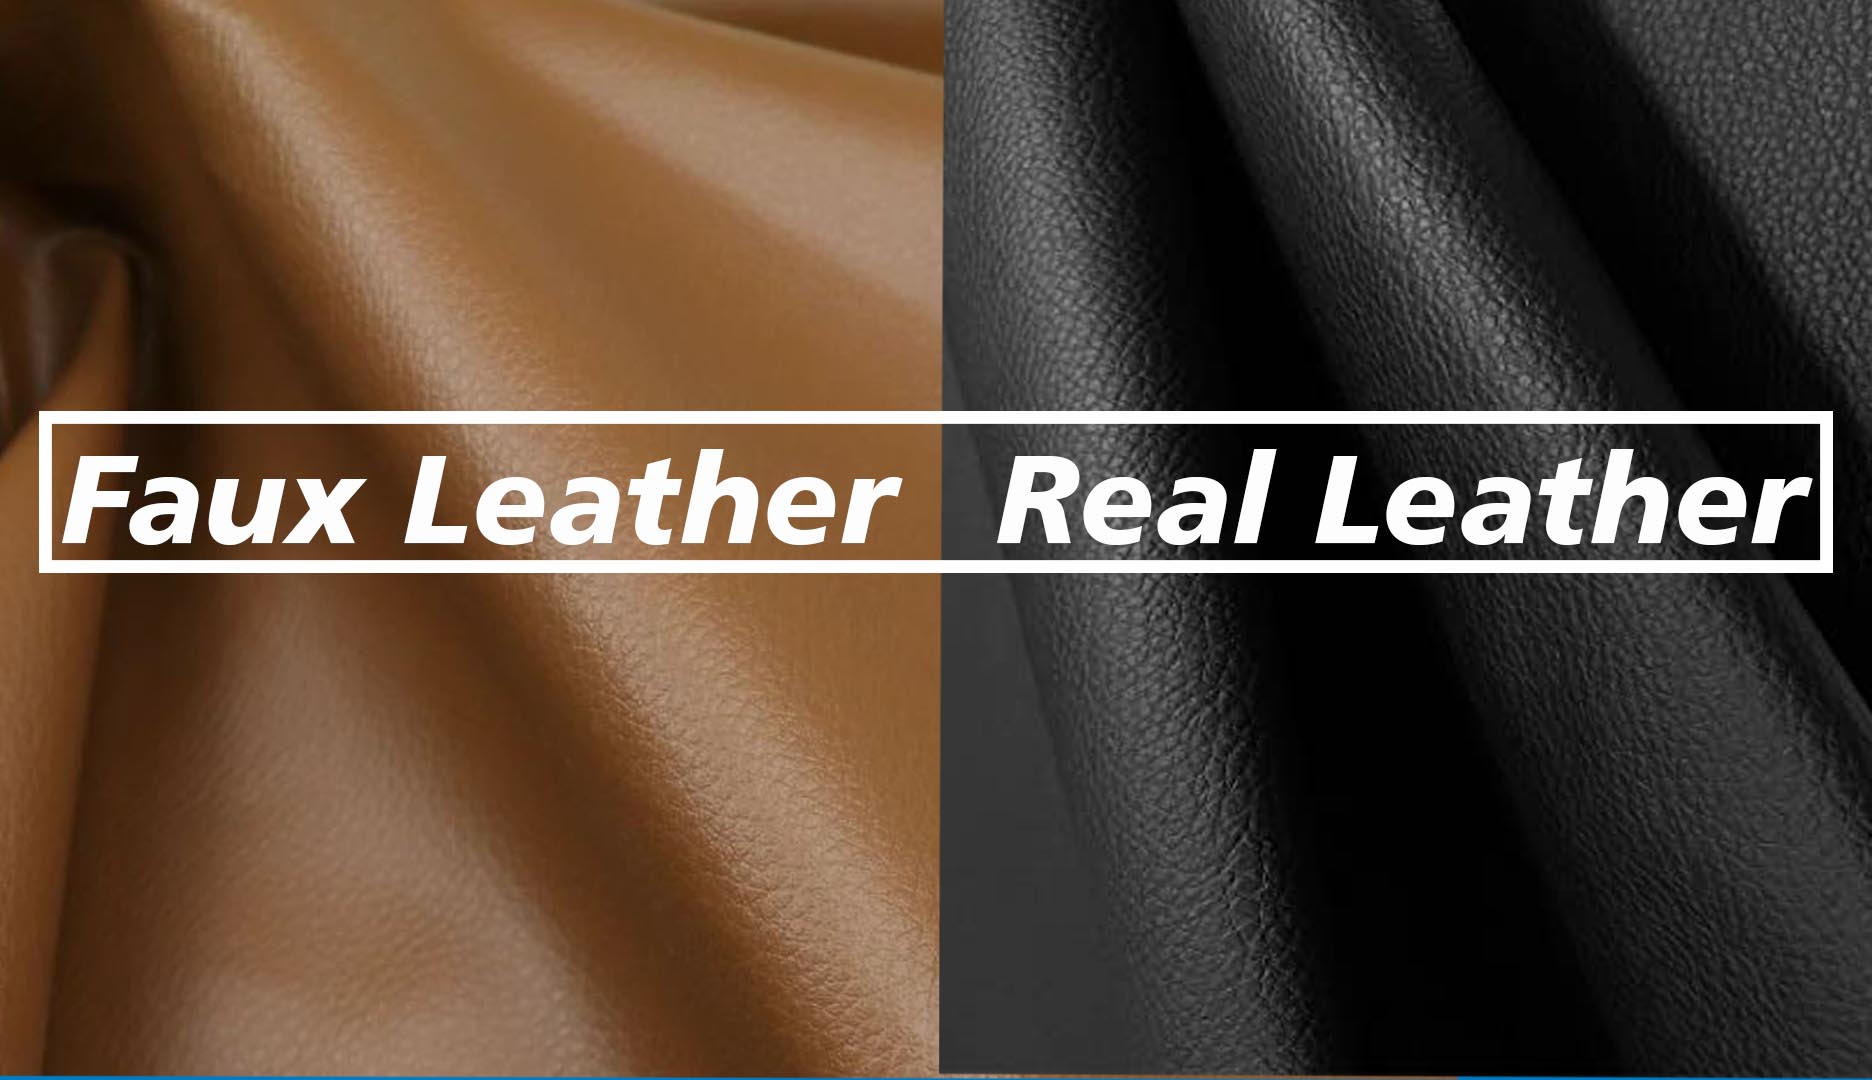 Faux Leather VS Real Leather